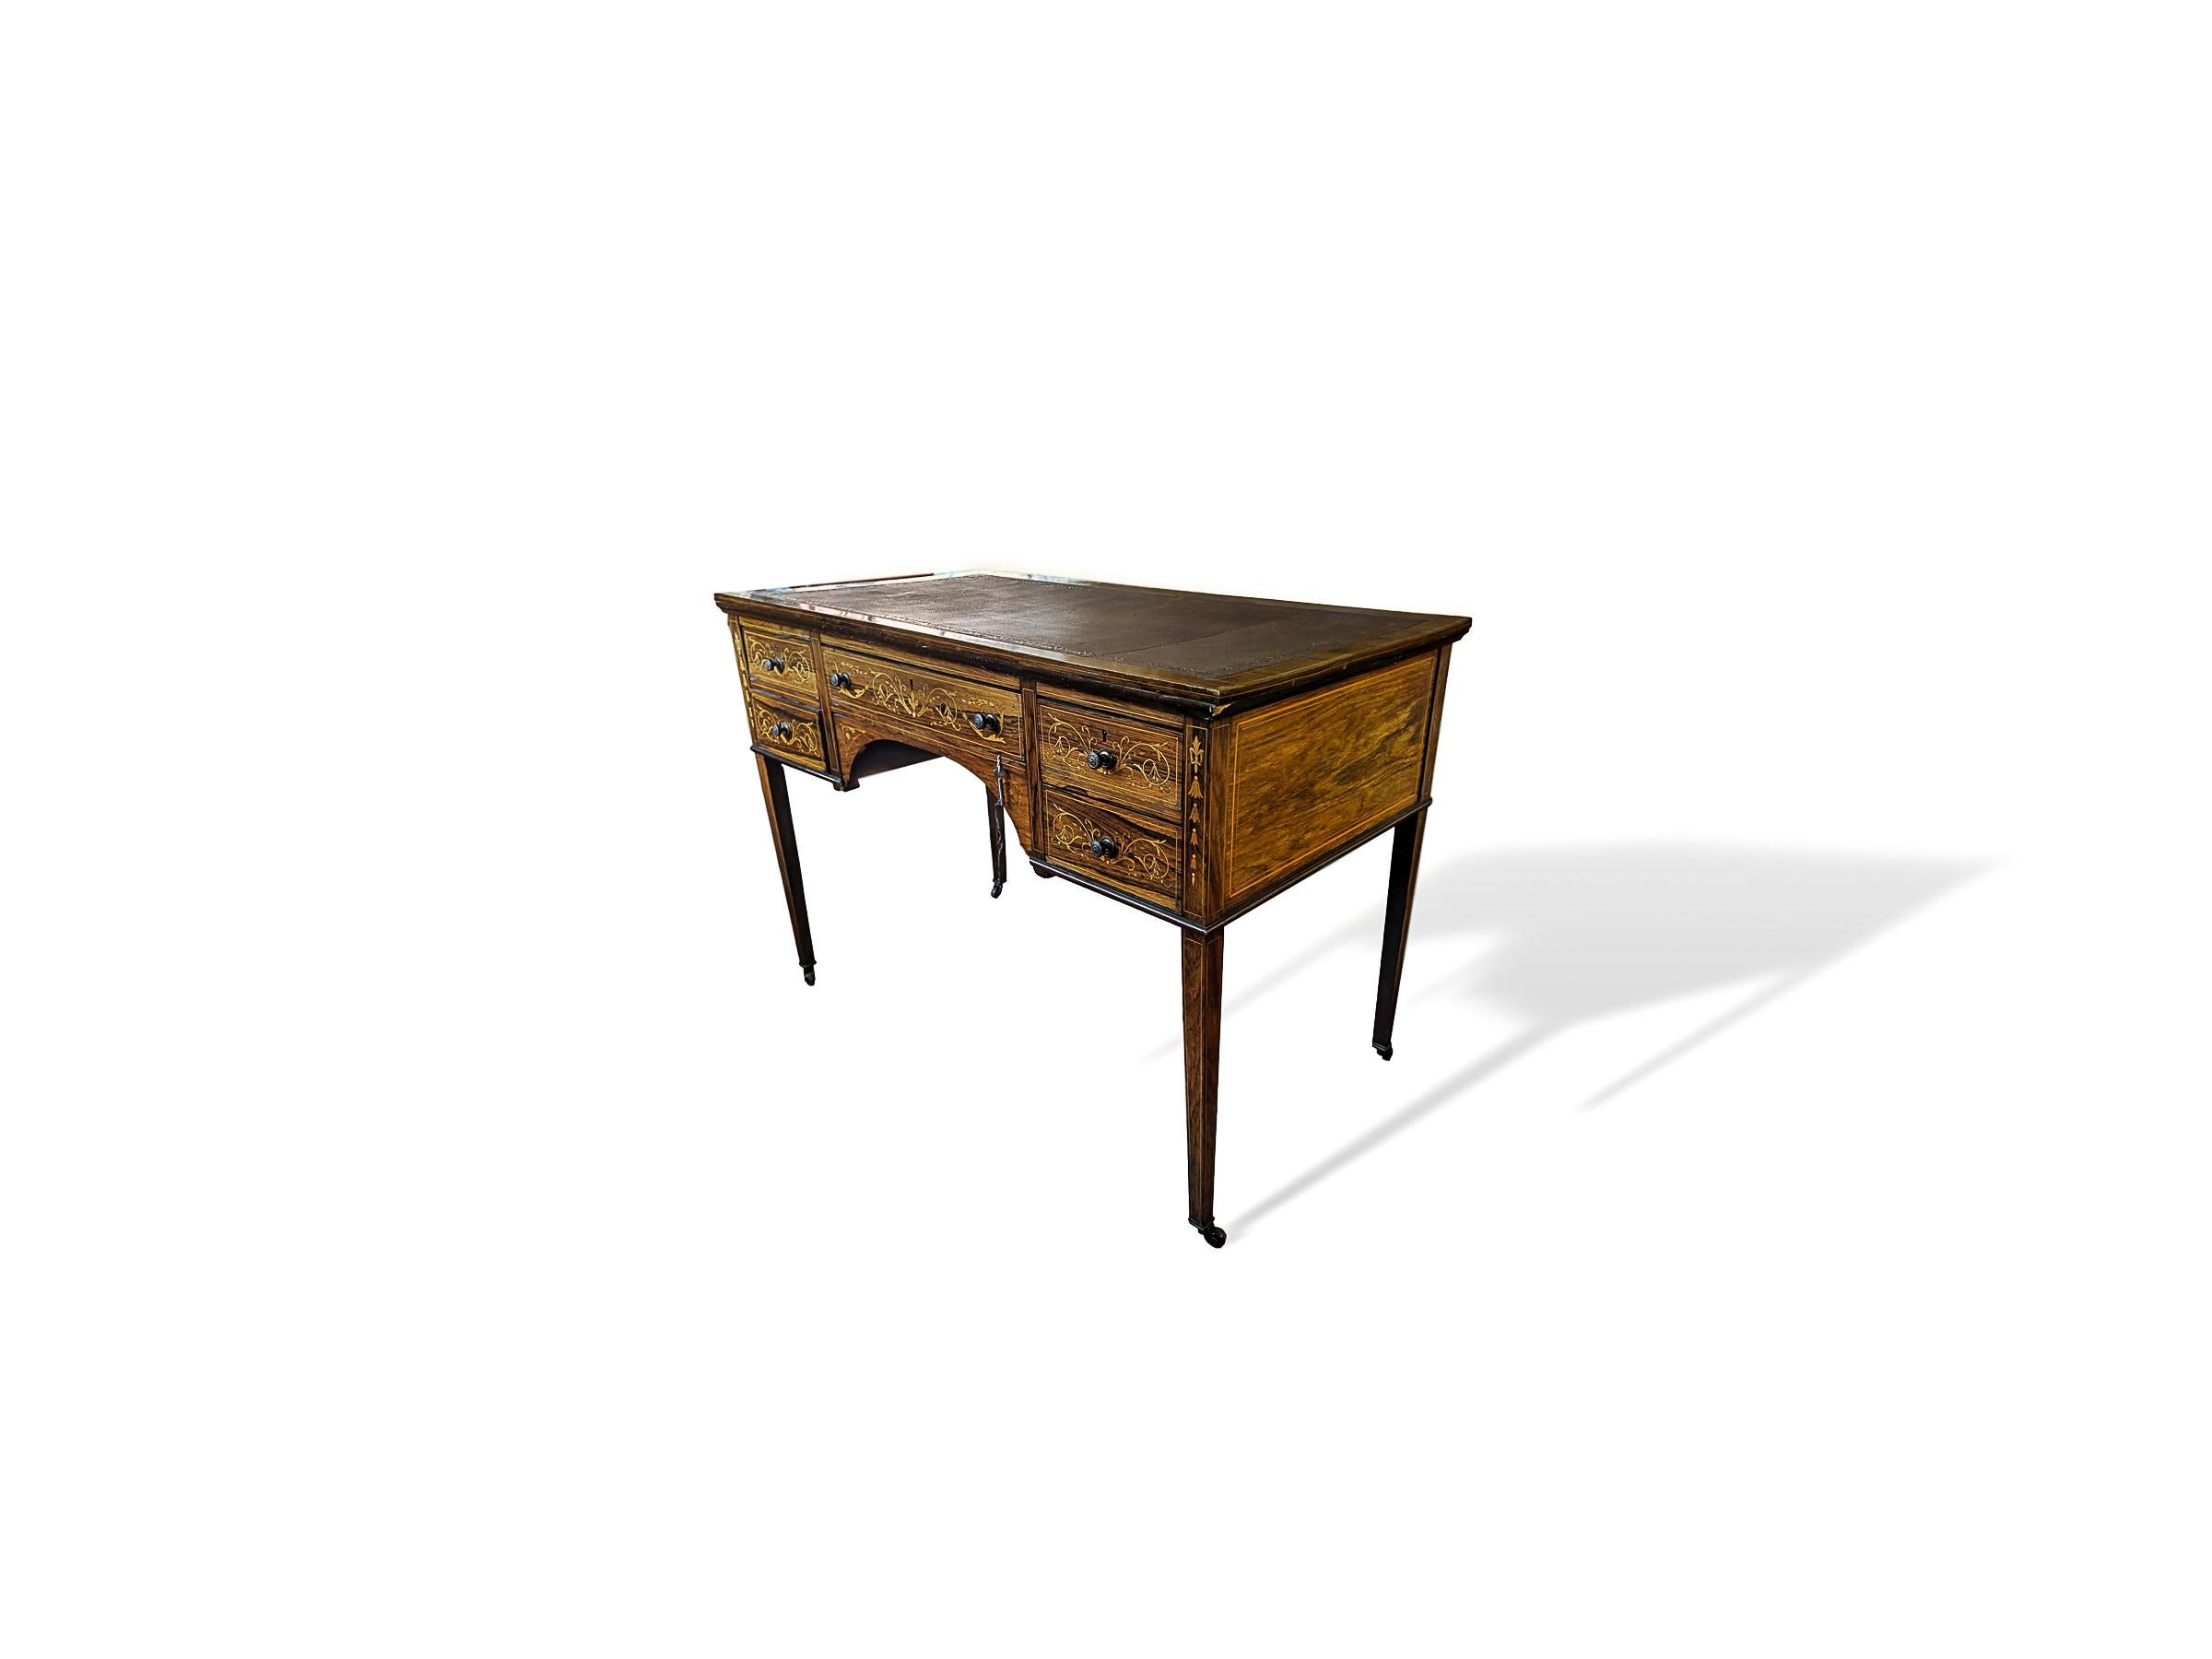 19th century Victorian rosewood writing desk with satinwood stringing and various Italianate marquetry and leather writing top, circa 1880. Slender tapered legs resting on original ceramic casters, drawers have original brass knob hardware and